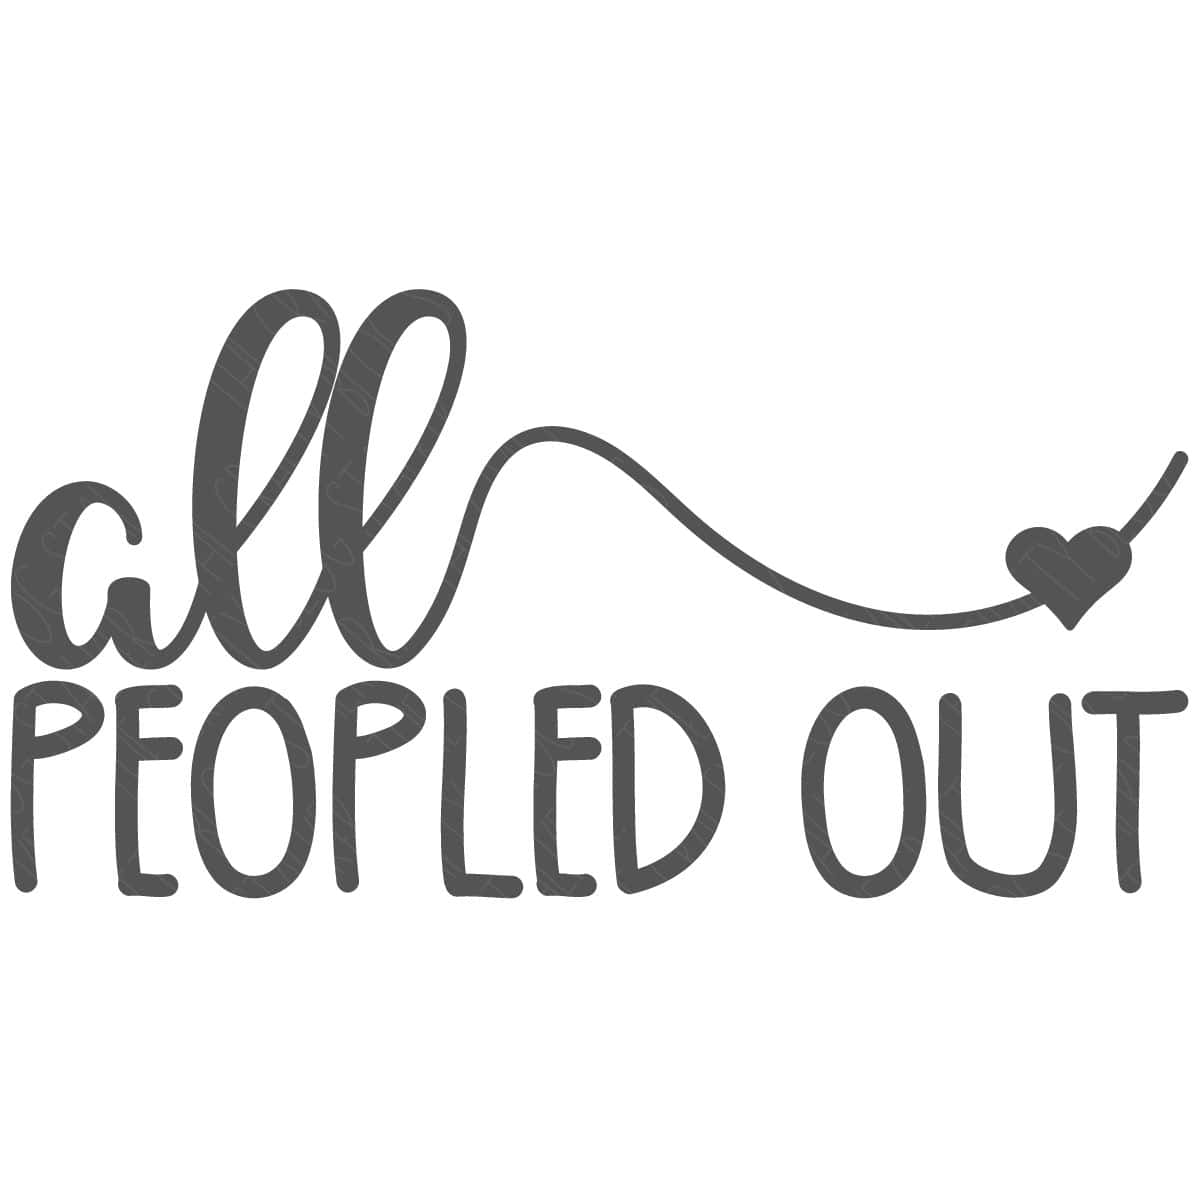 All People Out SVG	

			
		
	

		
			$3.00 – Buy Now Checkout
							
					
						
							
						
						Added to cart